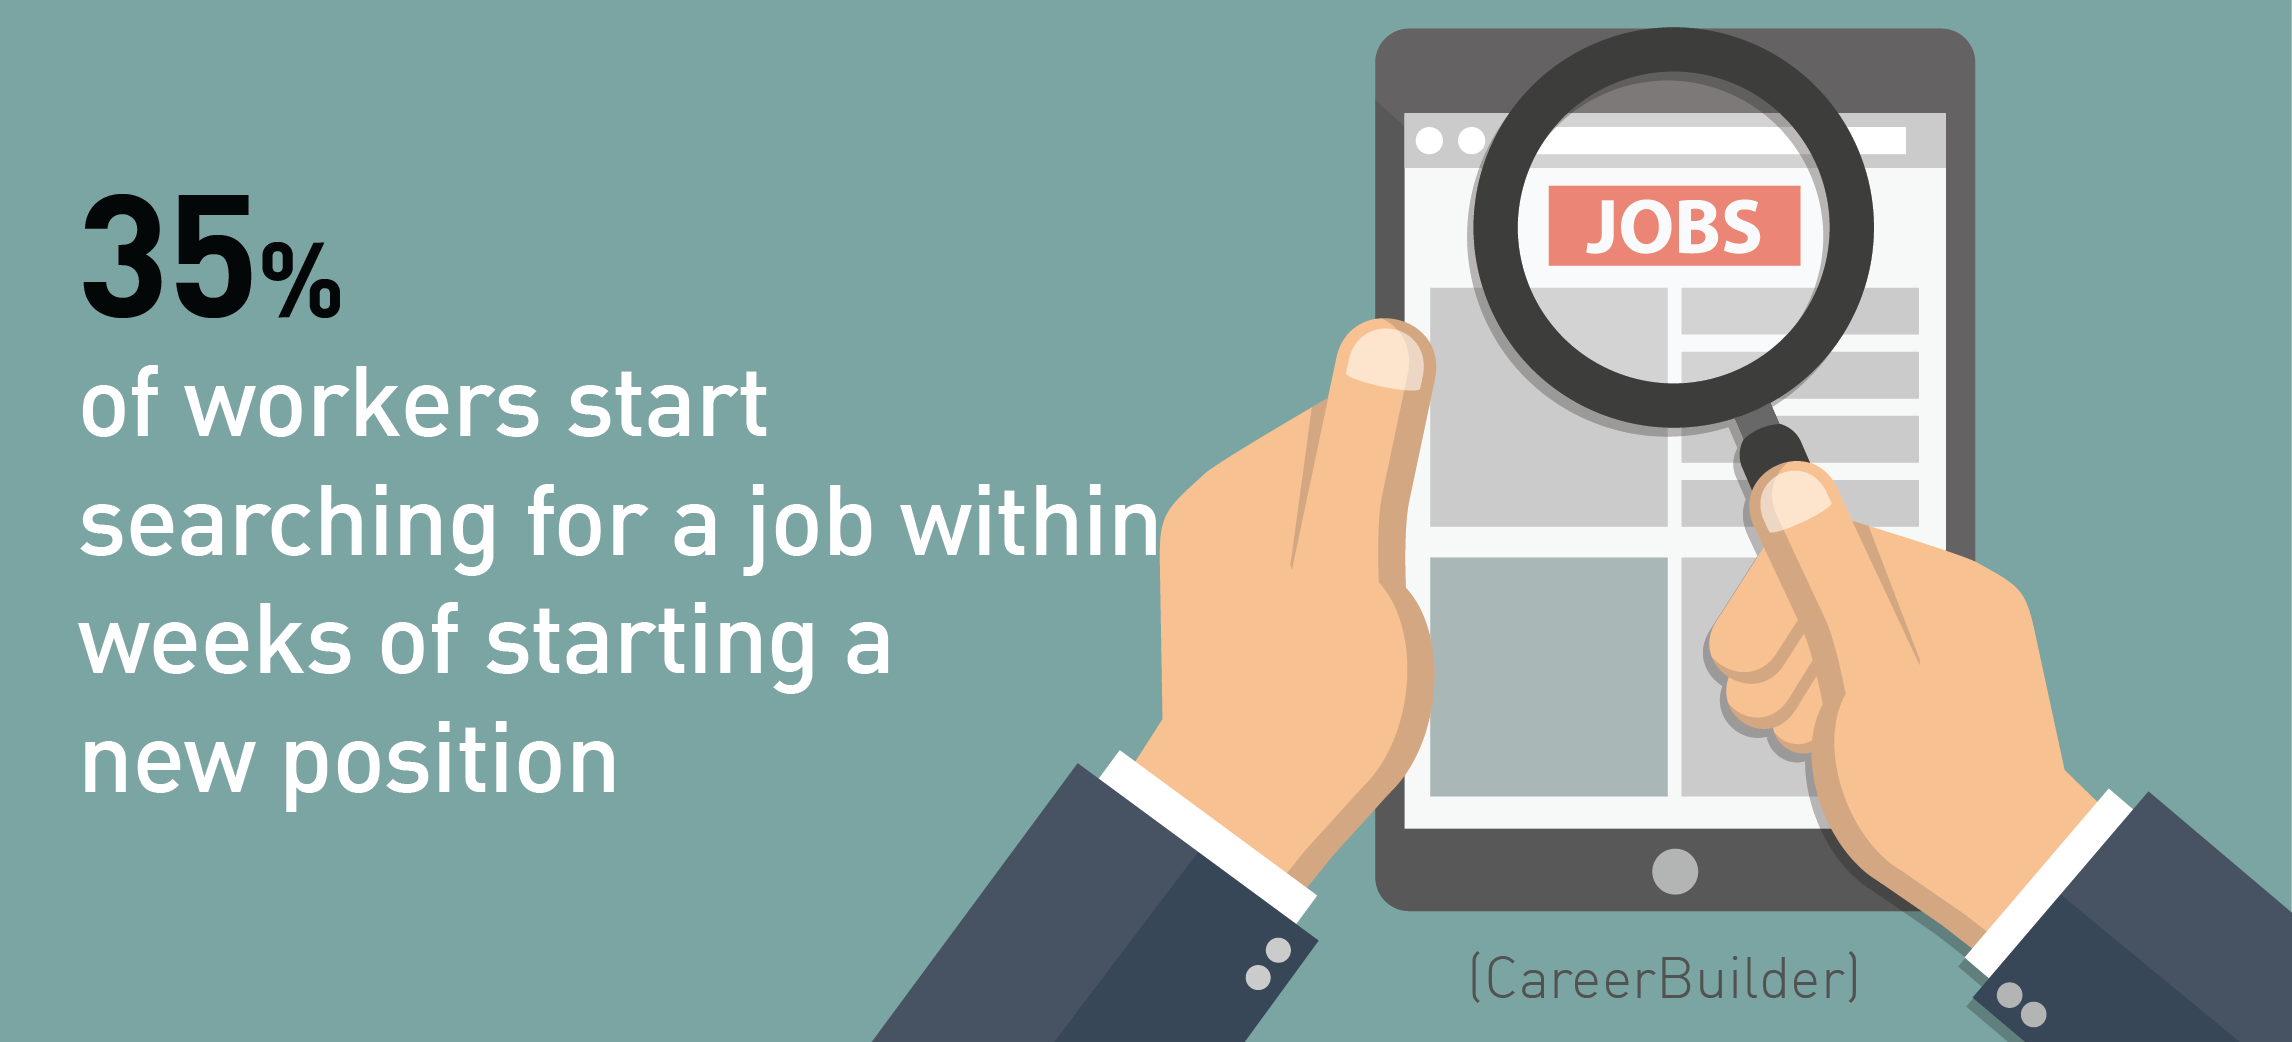 35% of new hires start job-searching within 2 weeks of starting position